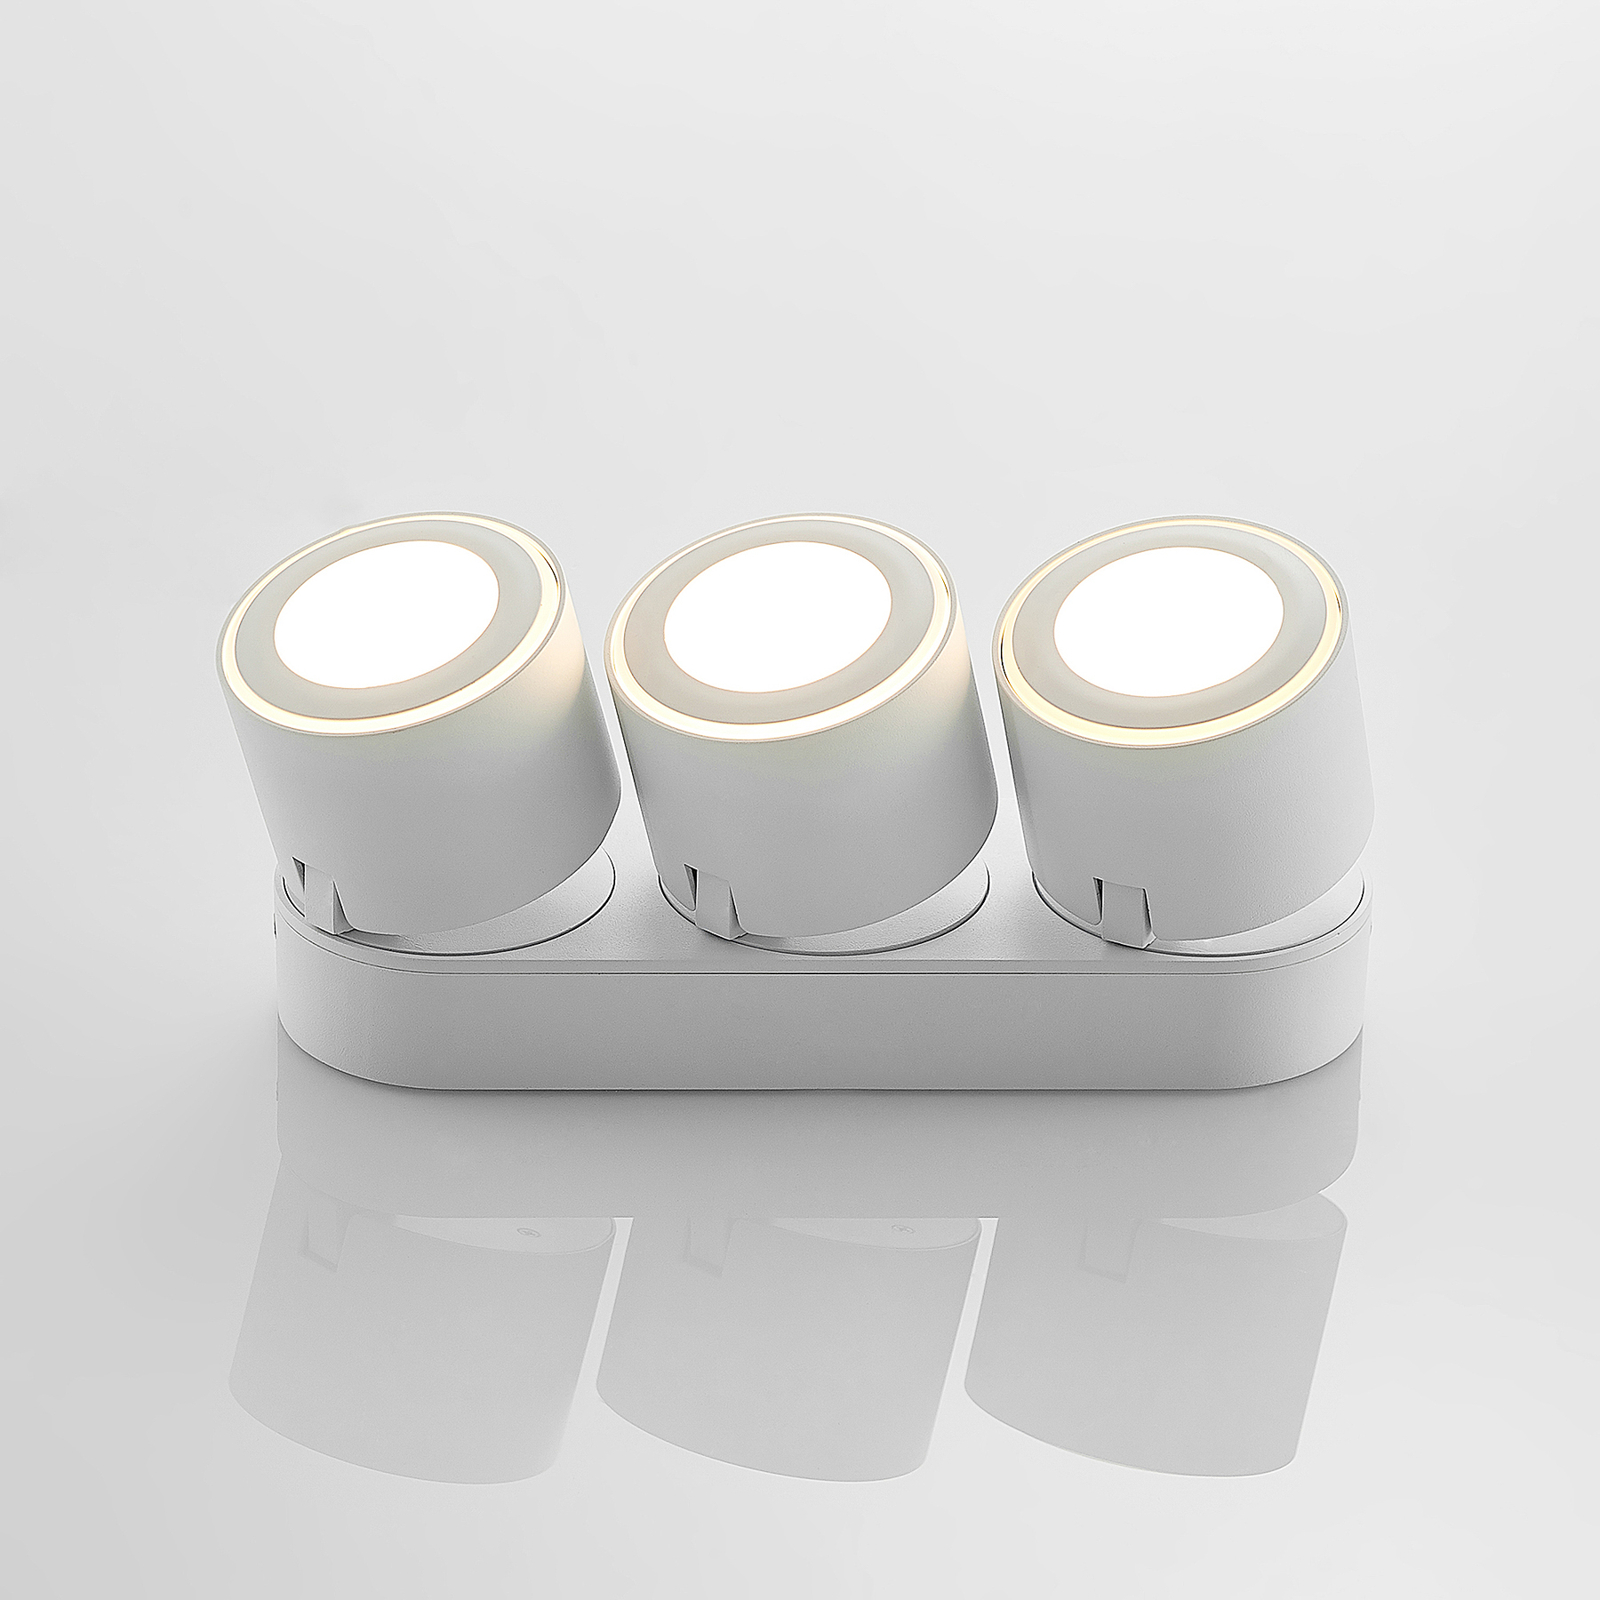 Lindby Lowie spot LED, 3 luci, bianco